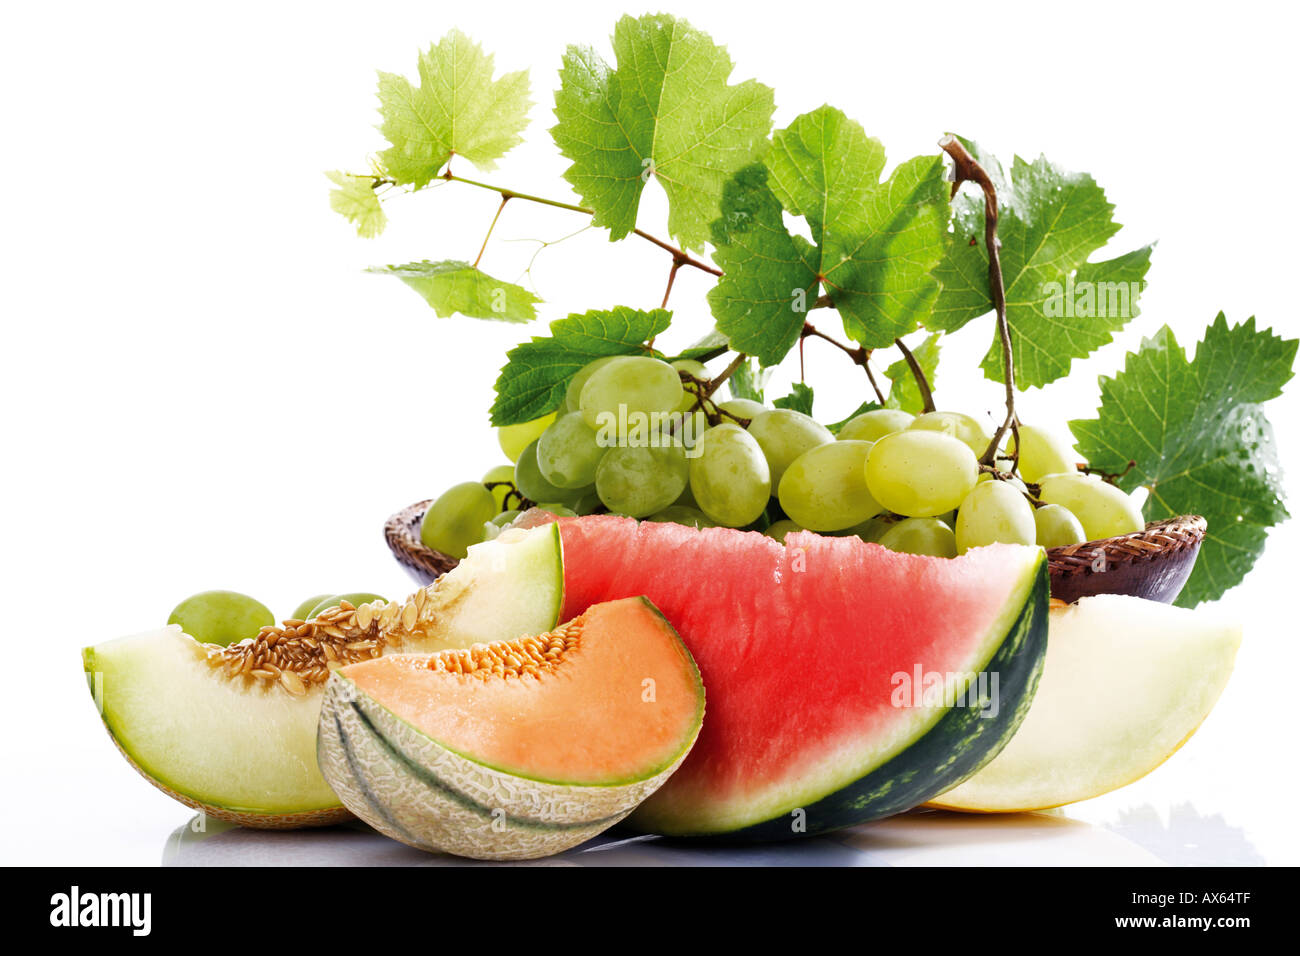 Various sliced melons and grapes, close-up Stock Photo